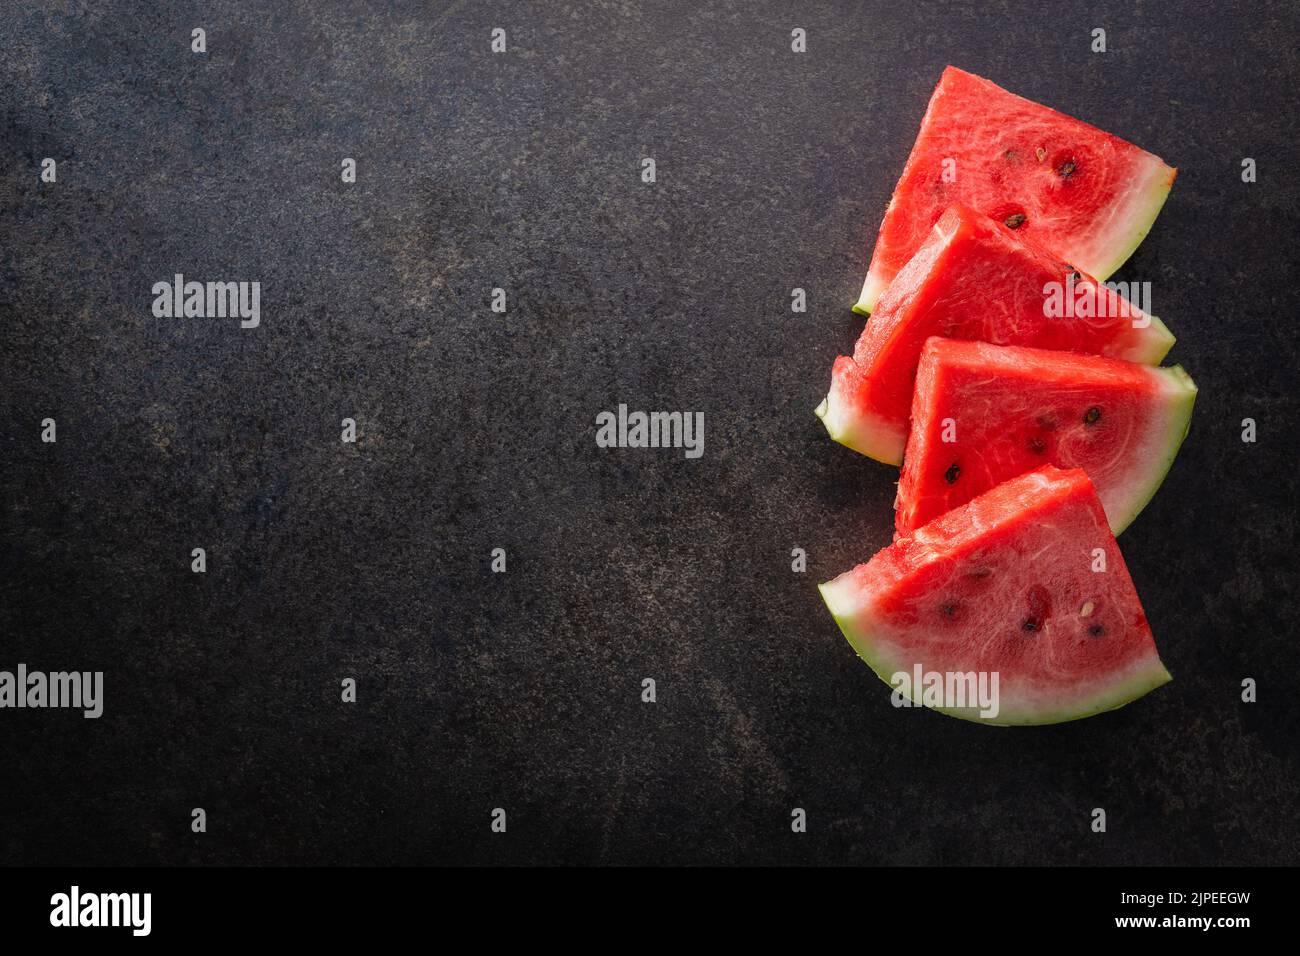 Slices of red watermelon on a black table. Top view. Stock Photo